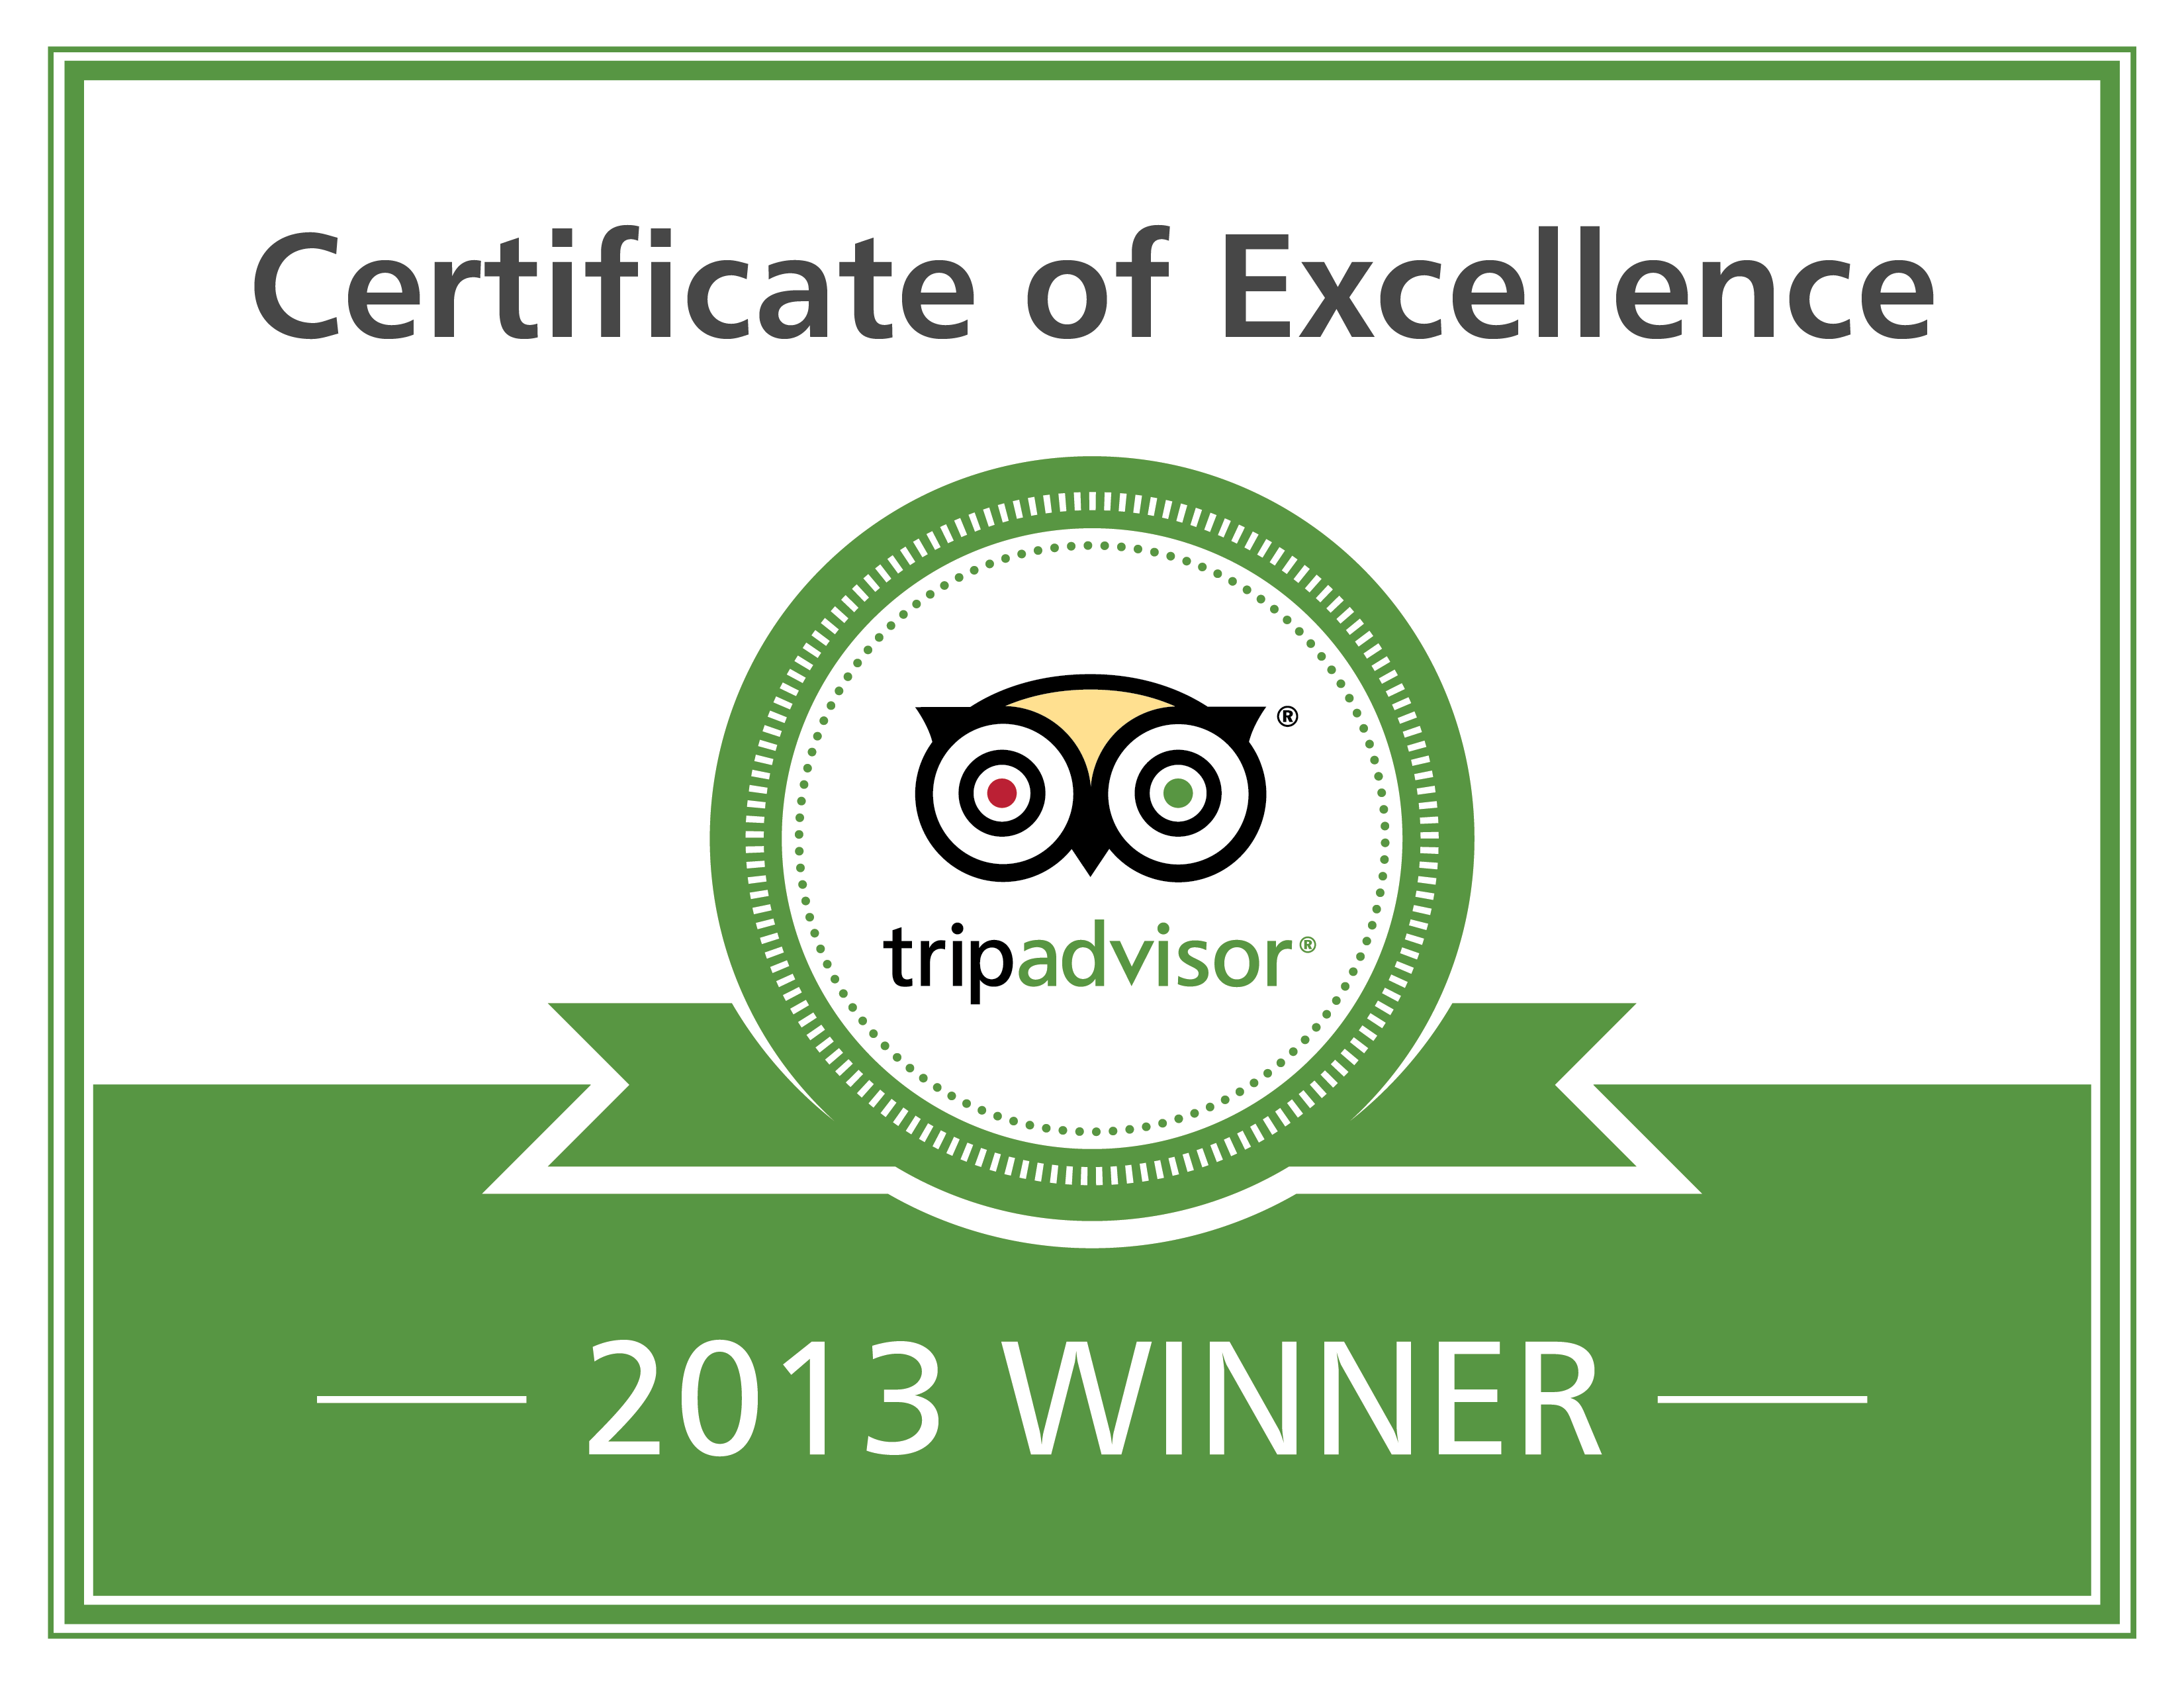 Trip Advisor certificate of excellence 2013